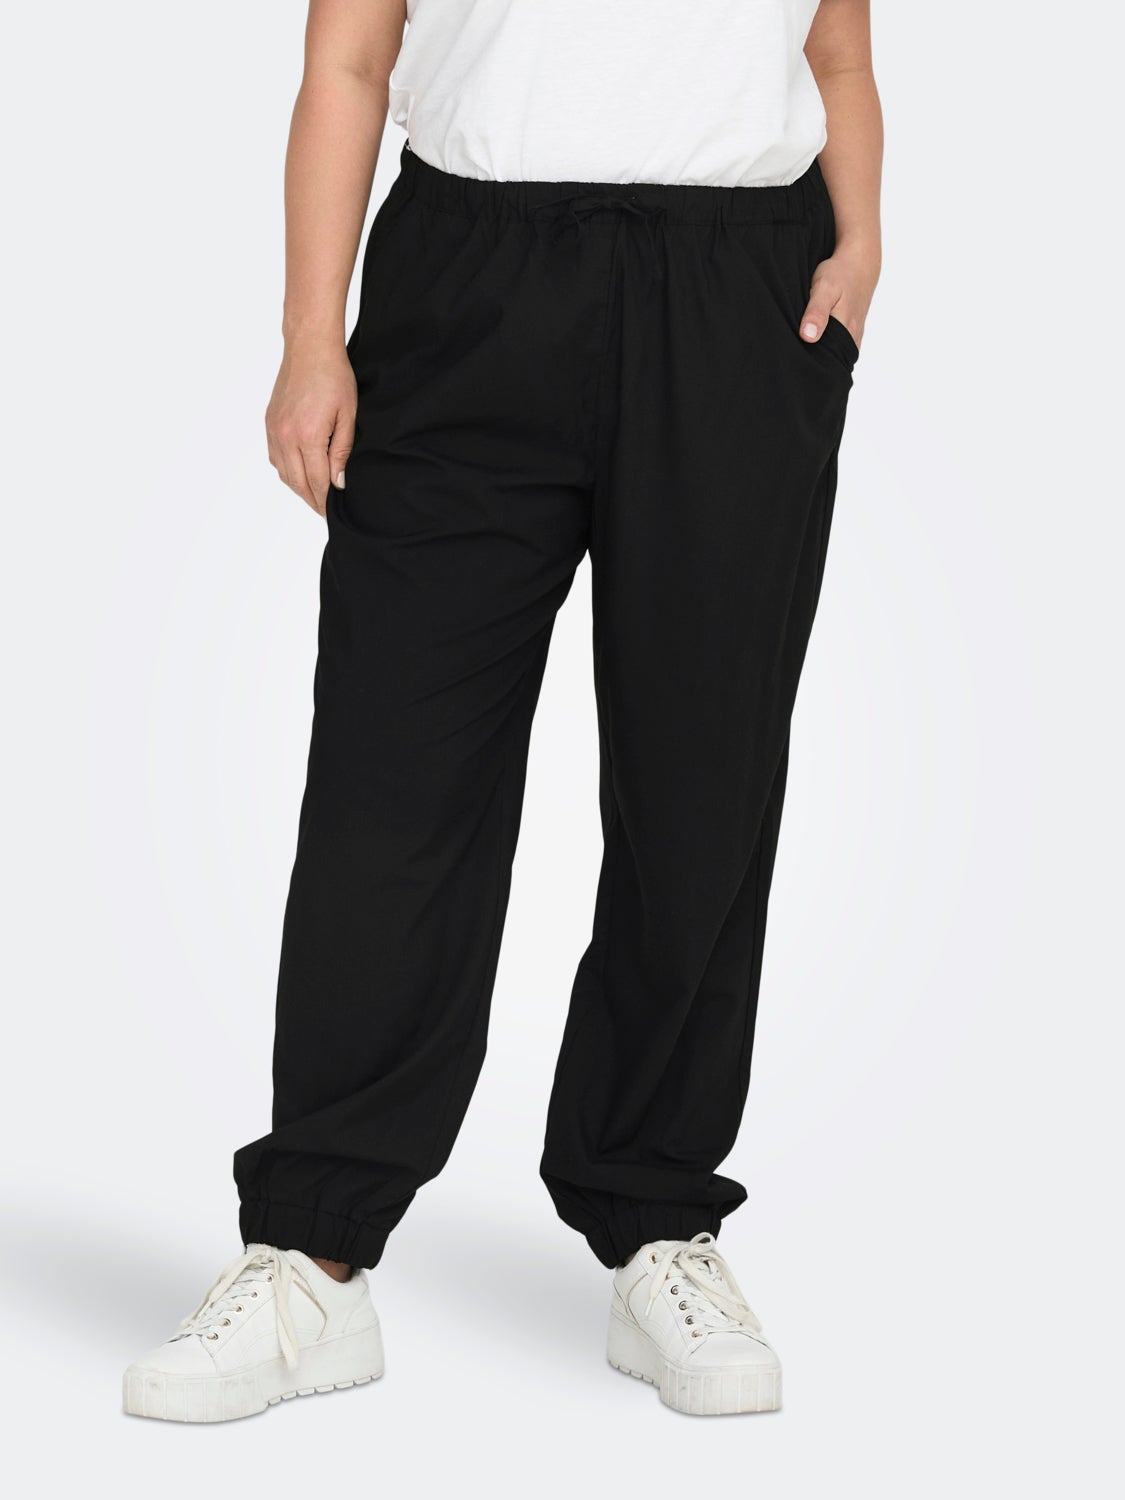 Women's Loose Track Pants With Side Bands by Palm Angels | Coltorti Boutique